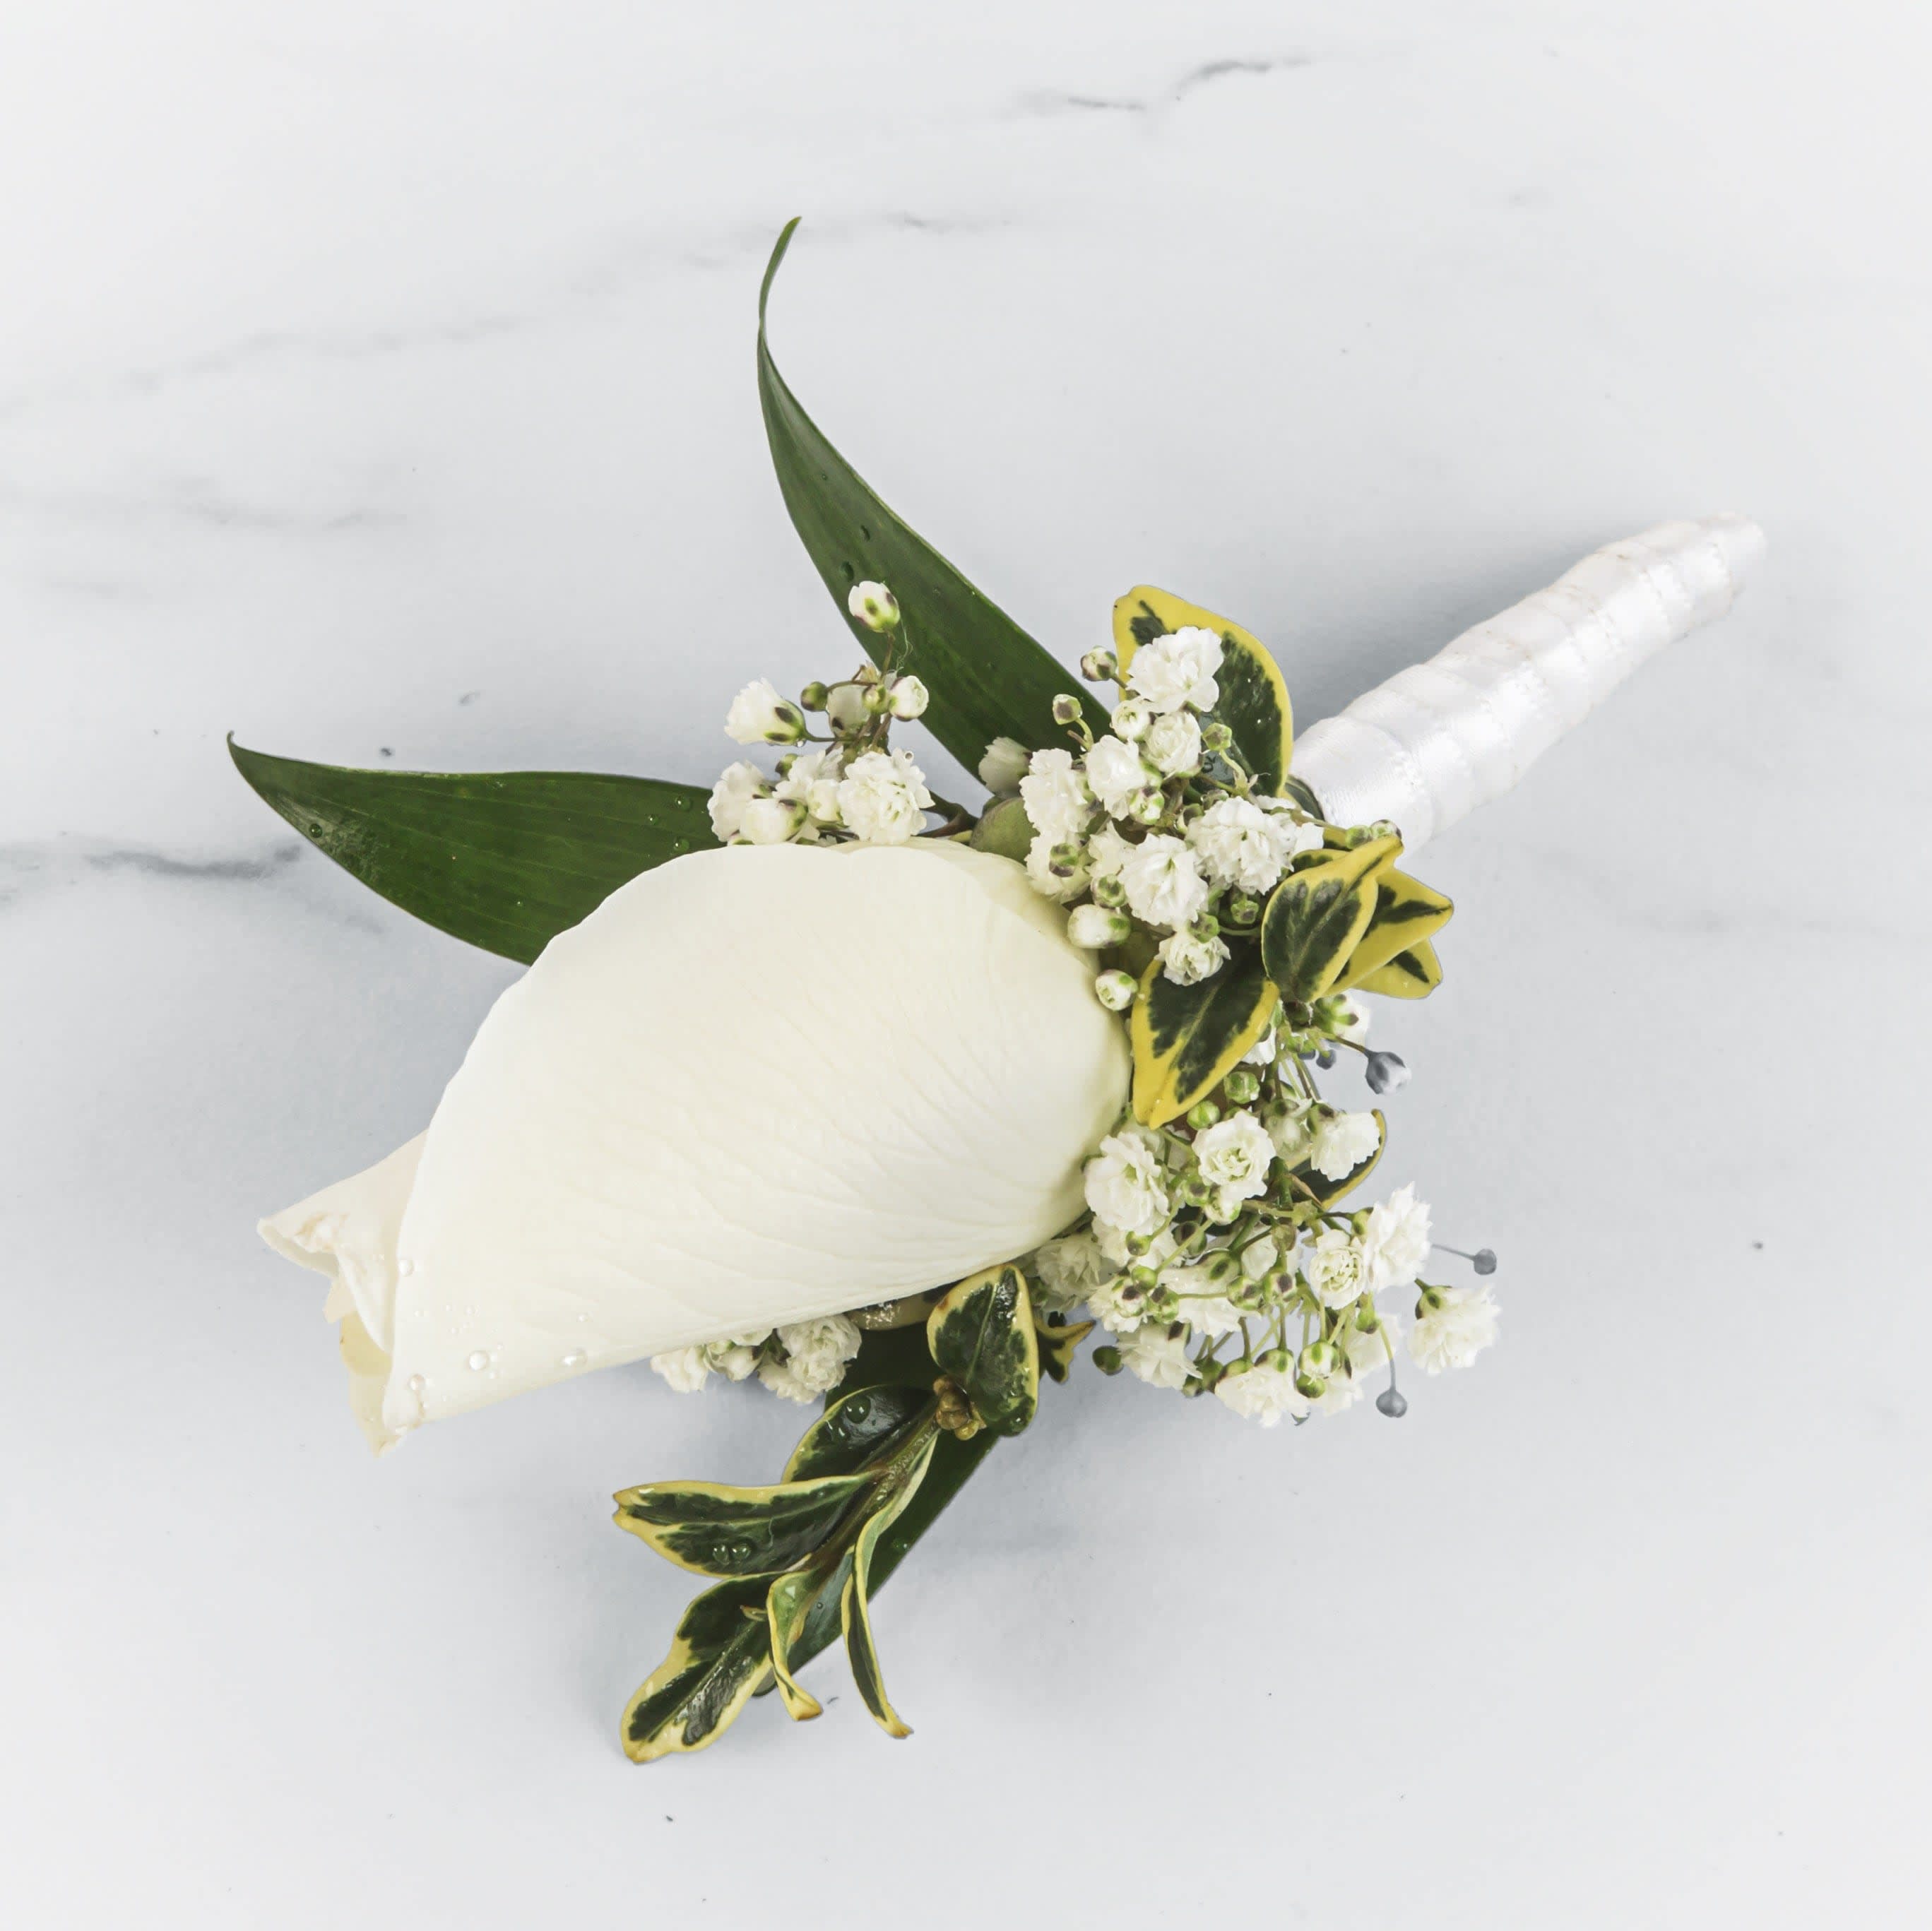 Boutonnière - Customize your Boutonniere with ribbon and accents.